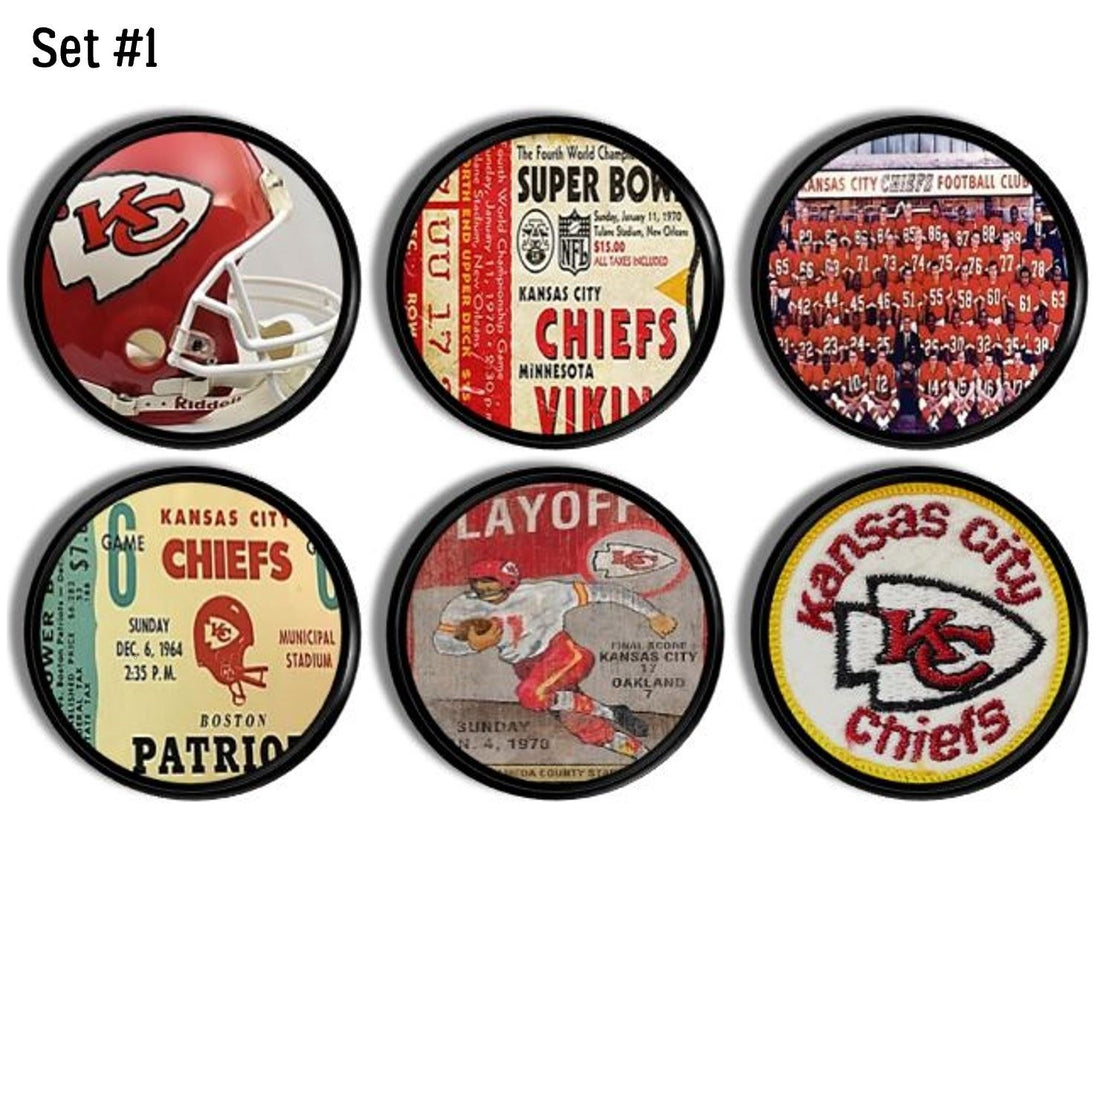 6 Decorative cabinet door knobs featuring vintage Kansas City Chiefs football team. Furniture drawer pull set for antique sports decor.